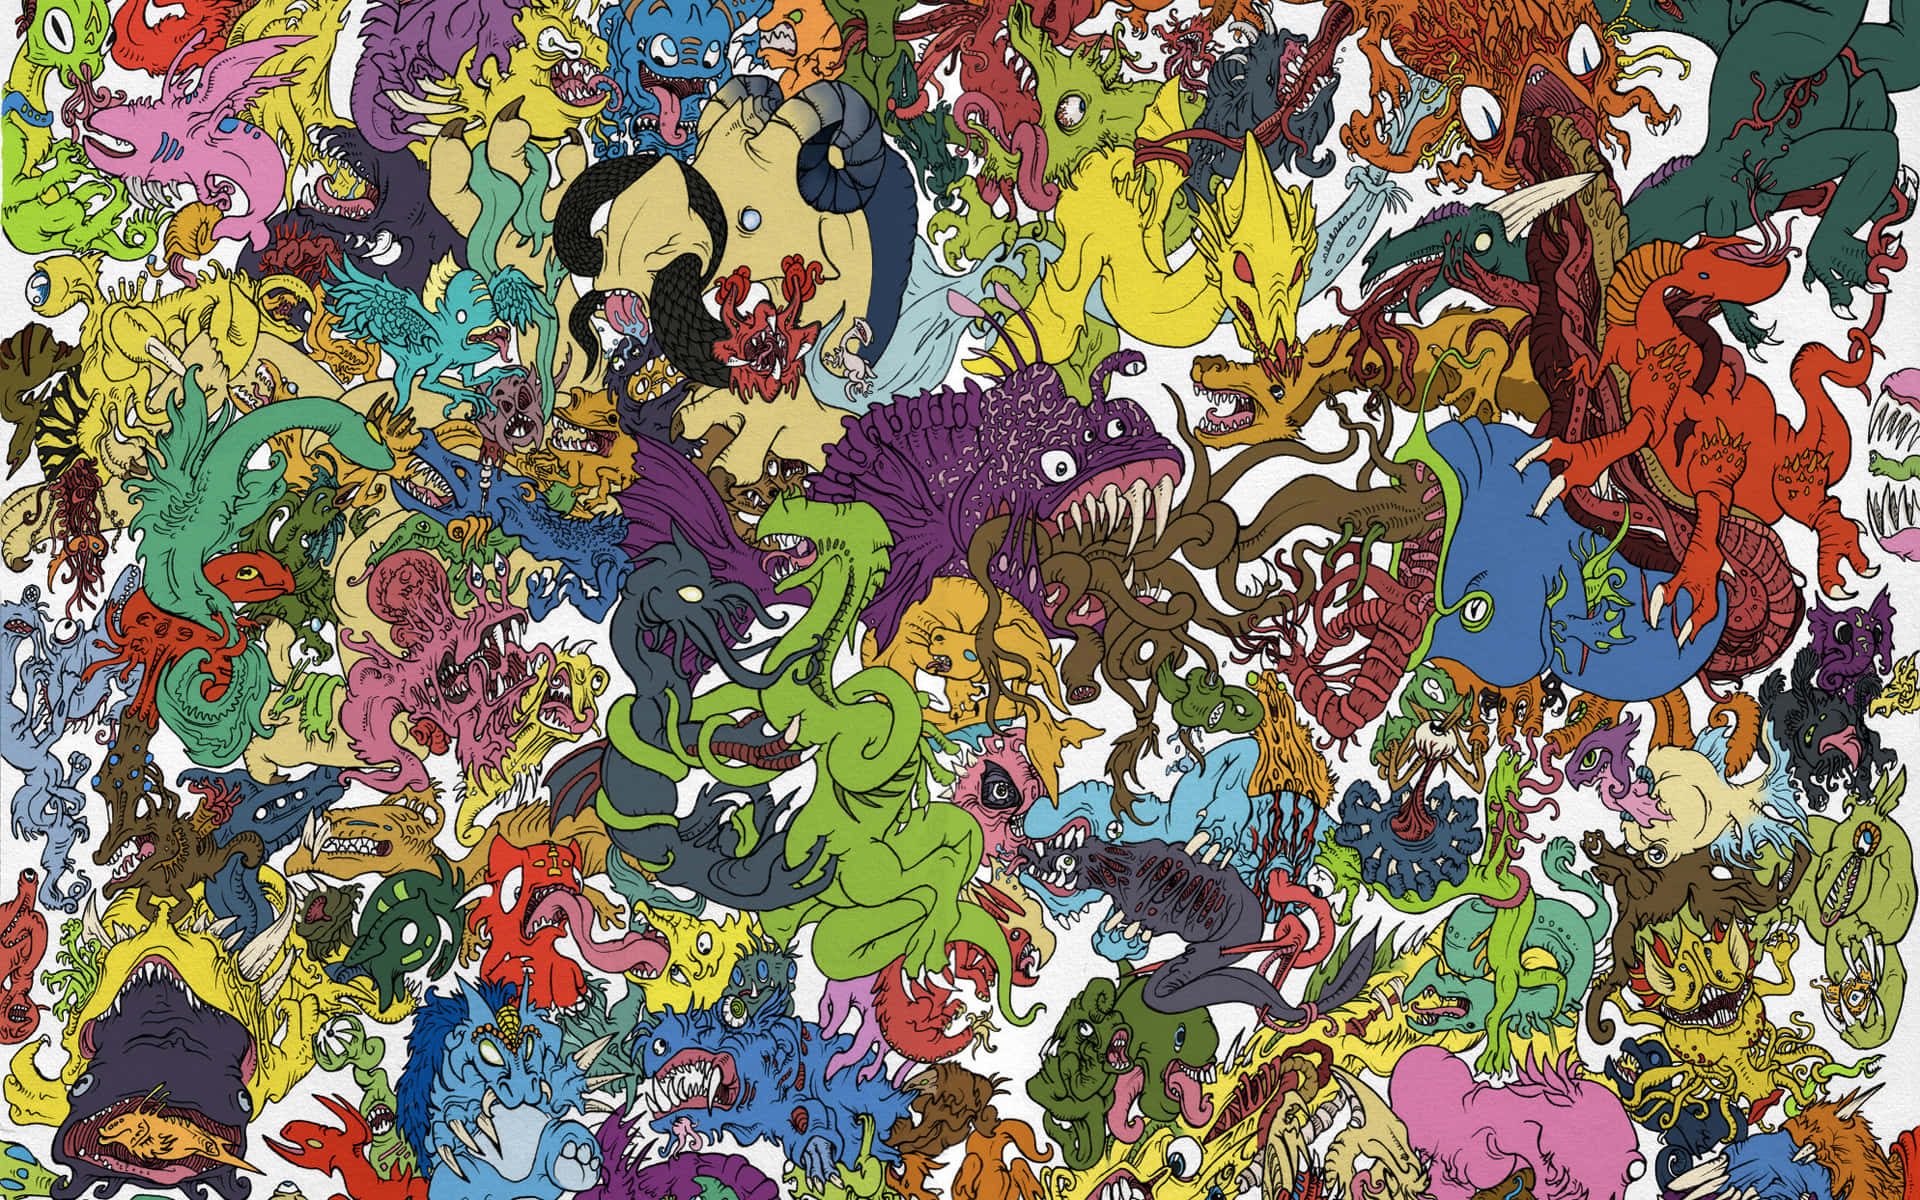 Four of your favorite cartoon characters in one bright, colorful collage! Wallpaper